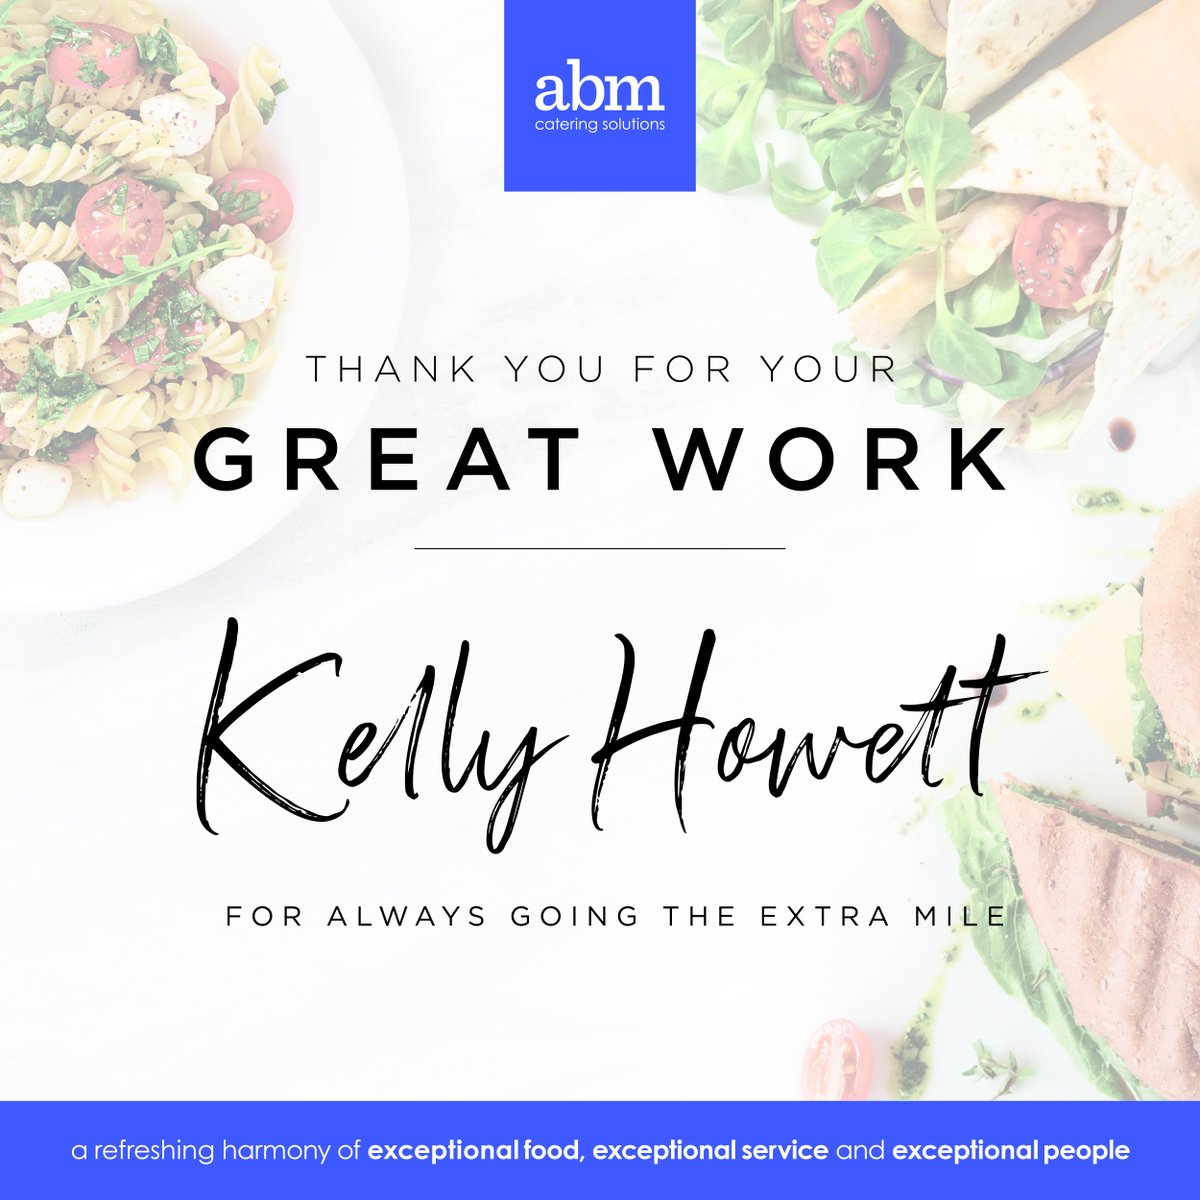 Many Congratulations to Kelly Howett on winning a Great Work reward! Thank you for all your hard work and always going the extra mile. Well done and enjoy your prize!  #greatwork  #employeerecogition #winner